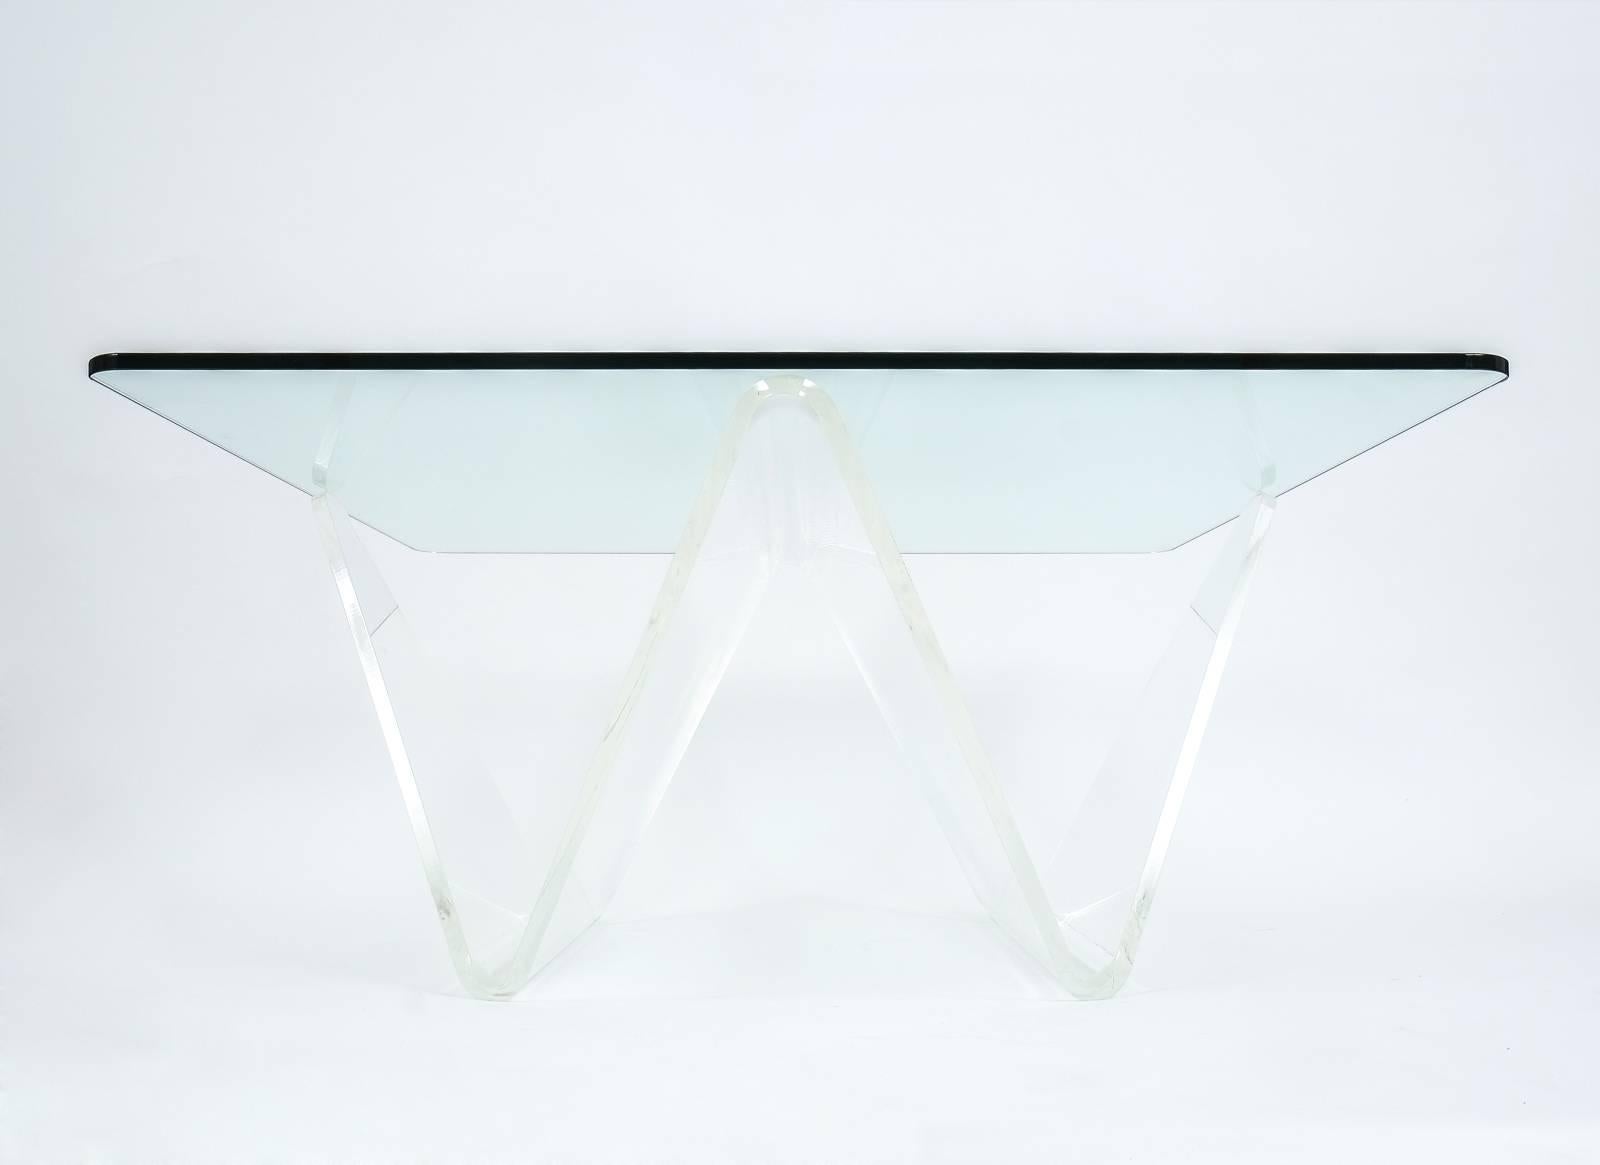 Large and very elegant Lucite and glass table consisting of a thick bended Lucite sheet and a glass tabletop. The condition is excellent. The base could easily carry an even larger customized tabletop, which we could provide of course, please